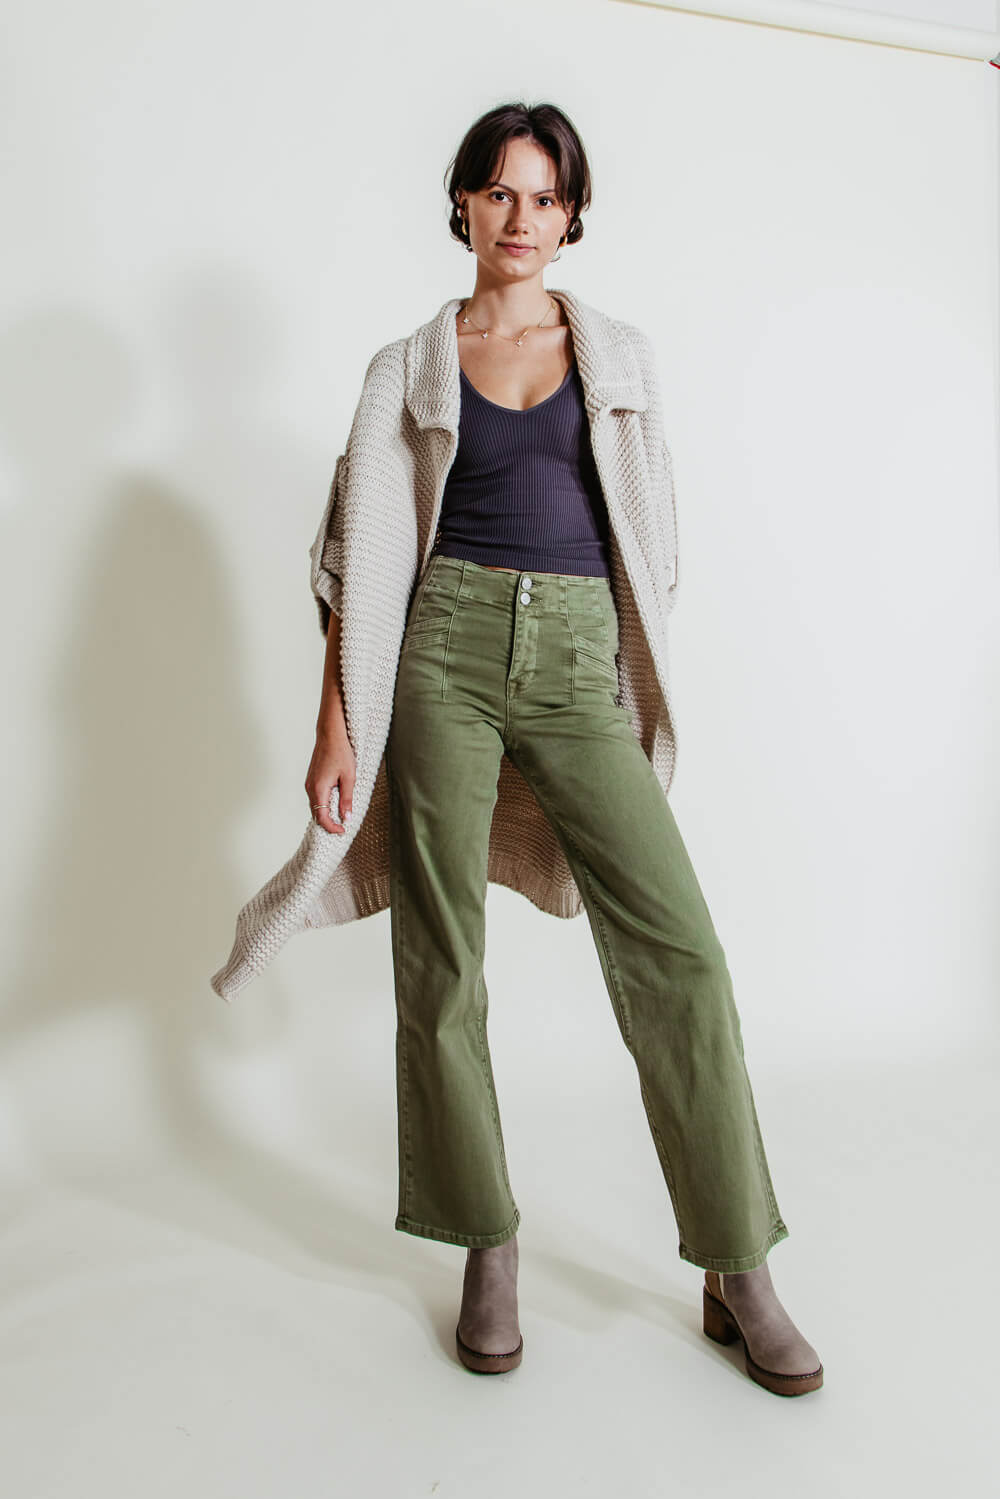 Distressed Olive Green Joggers | Social + Co Boutique